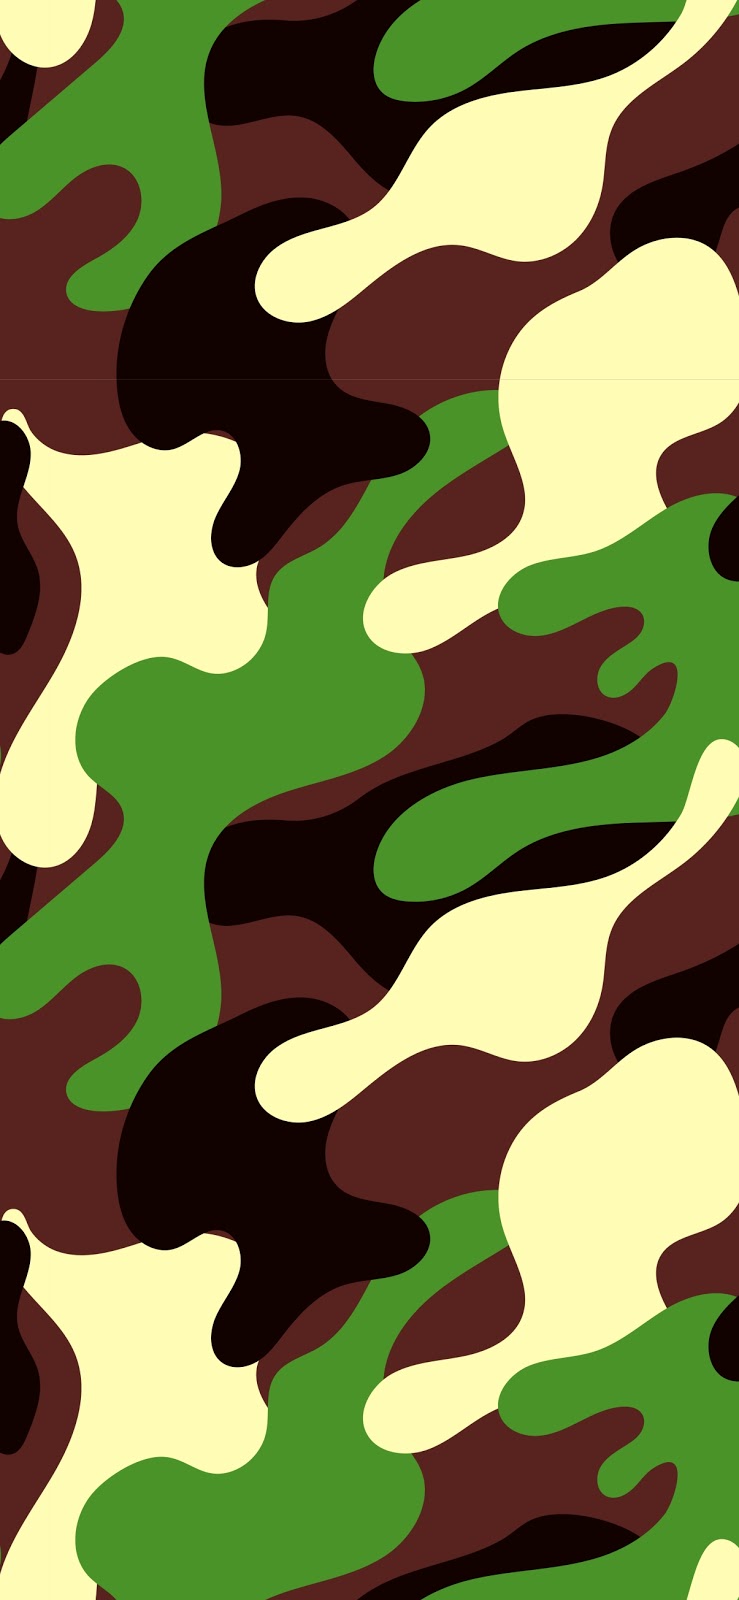 Camo Camouflage Wallpaper Hd 1205 X - Camouflage , HD Wallpaper & Backgrounds